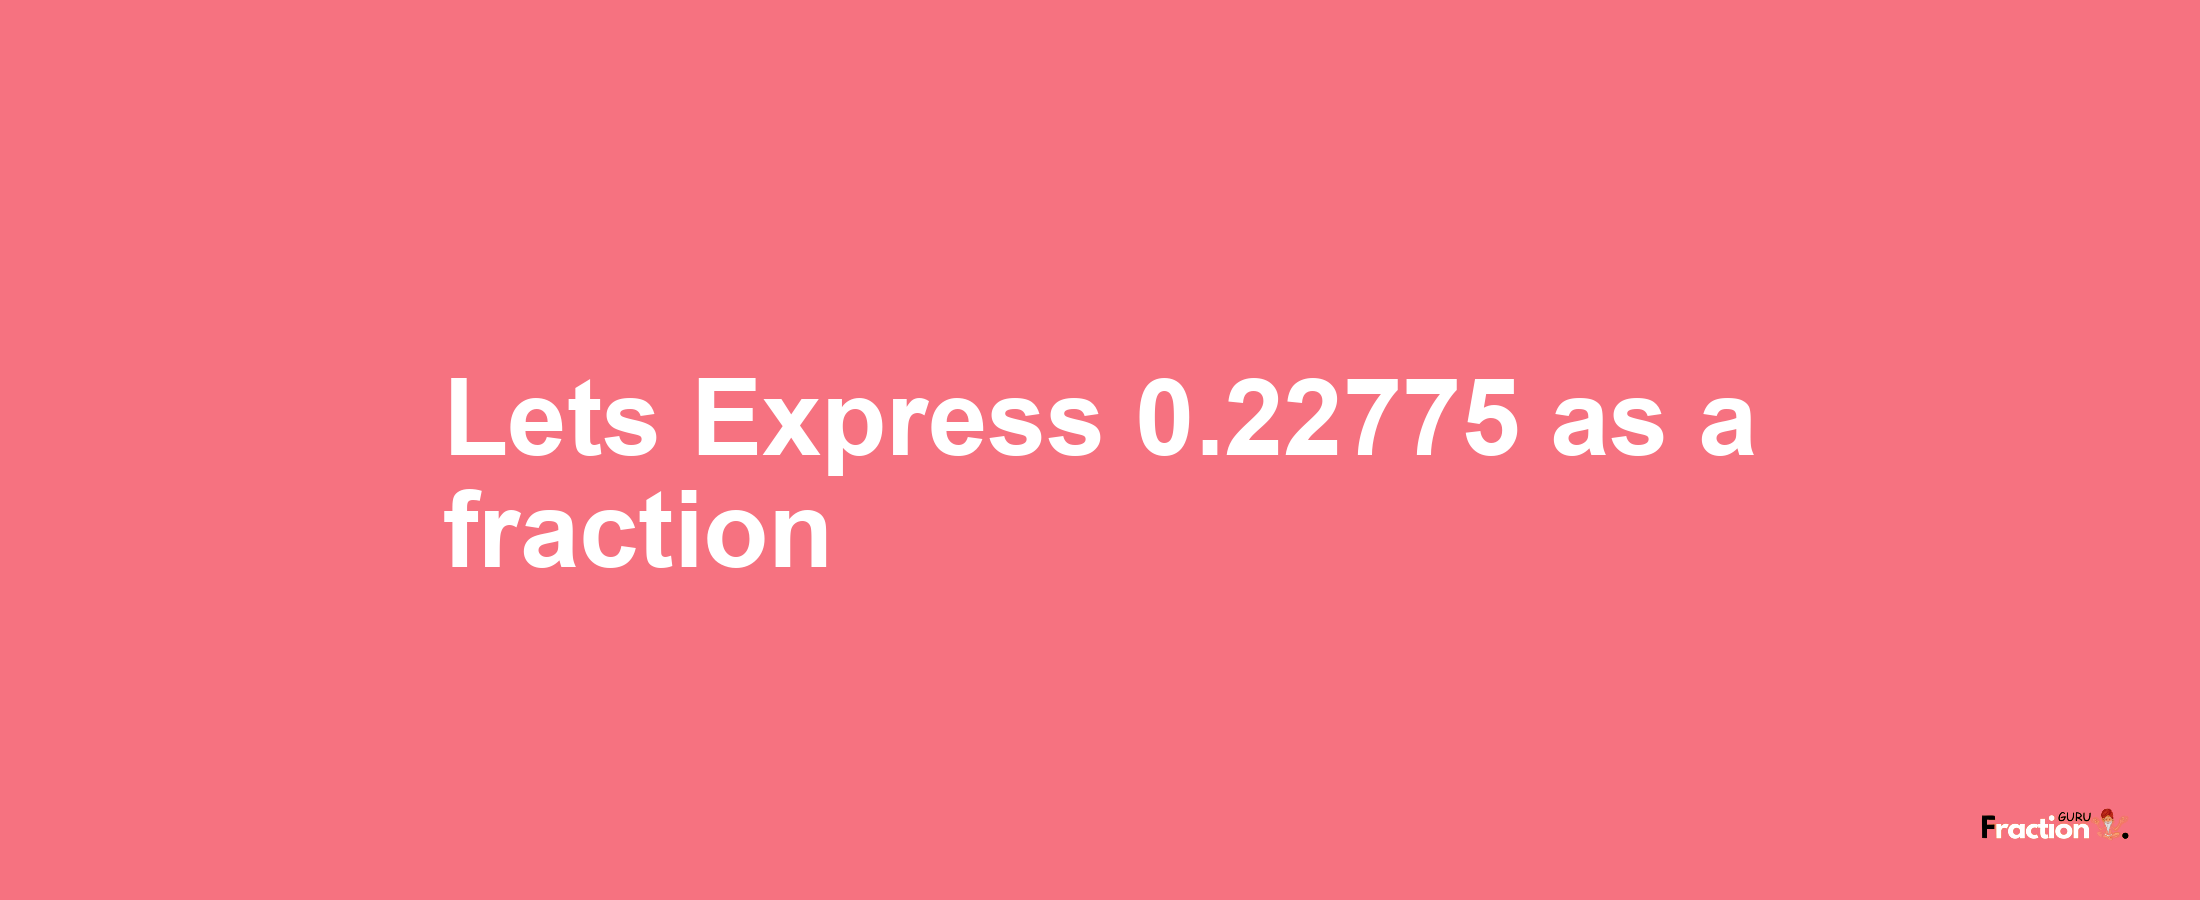 Lets Express 0.22775 as afraction